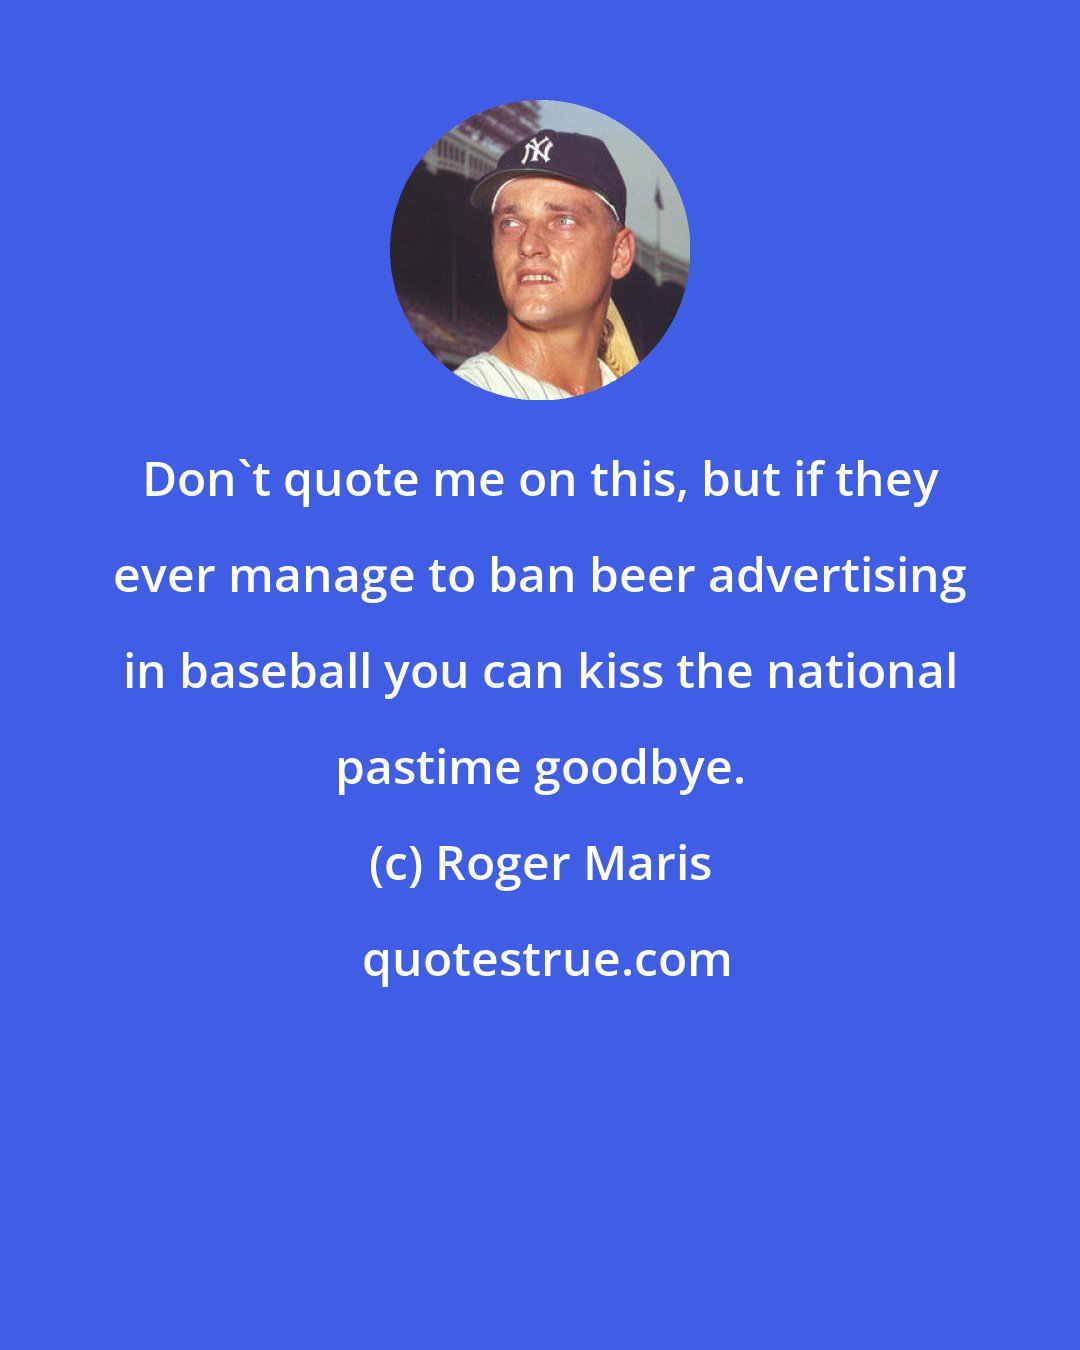 Roger Maris: Don't quote me on this, but if they ever manage to ban beer advertising in baseball you can kiss the national pastime goodbye.